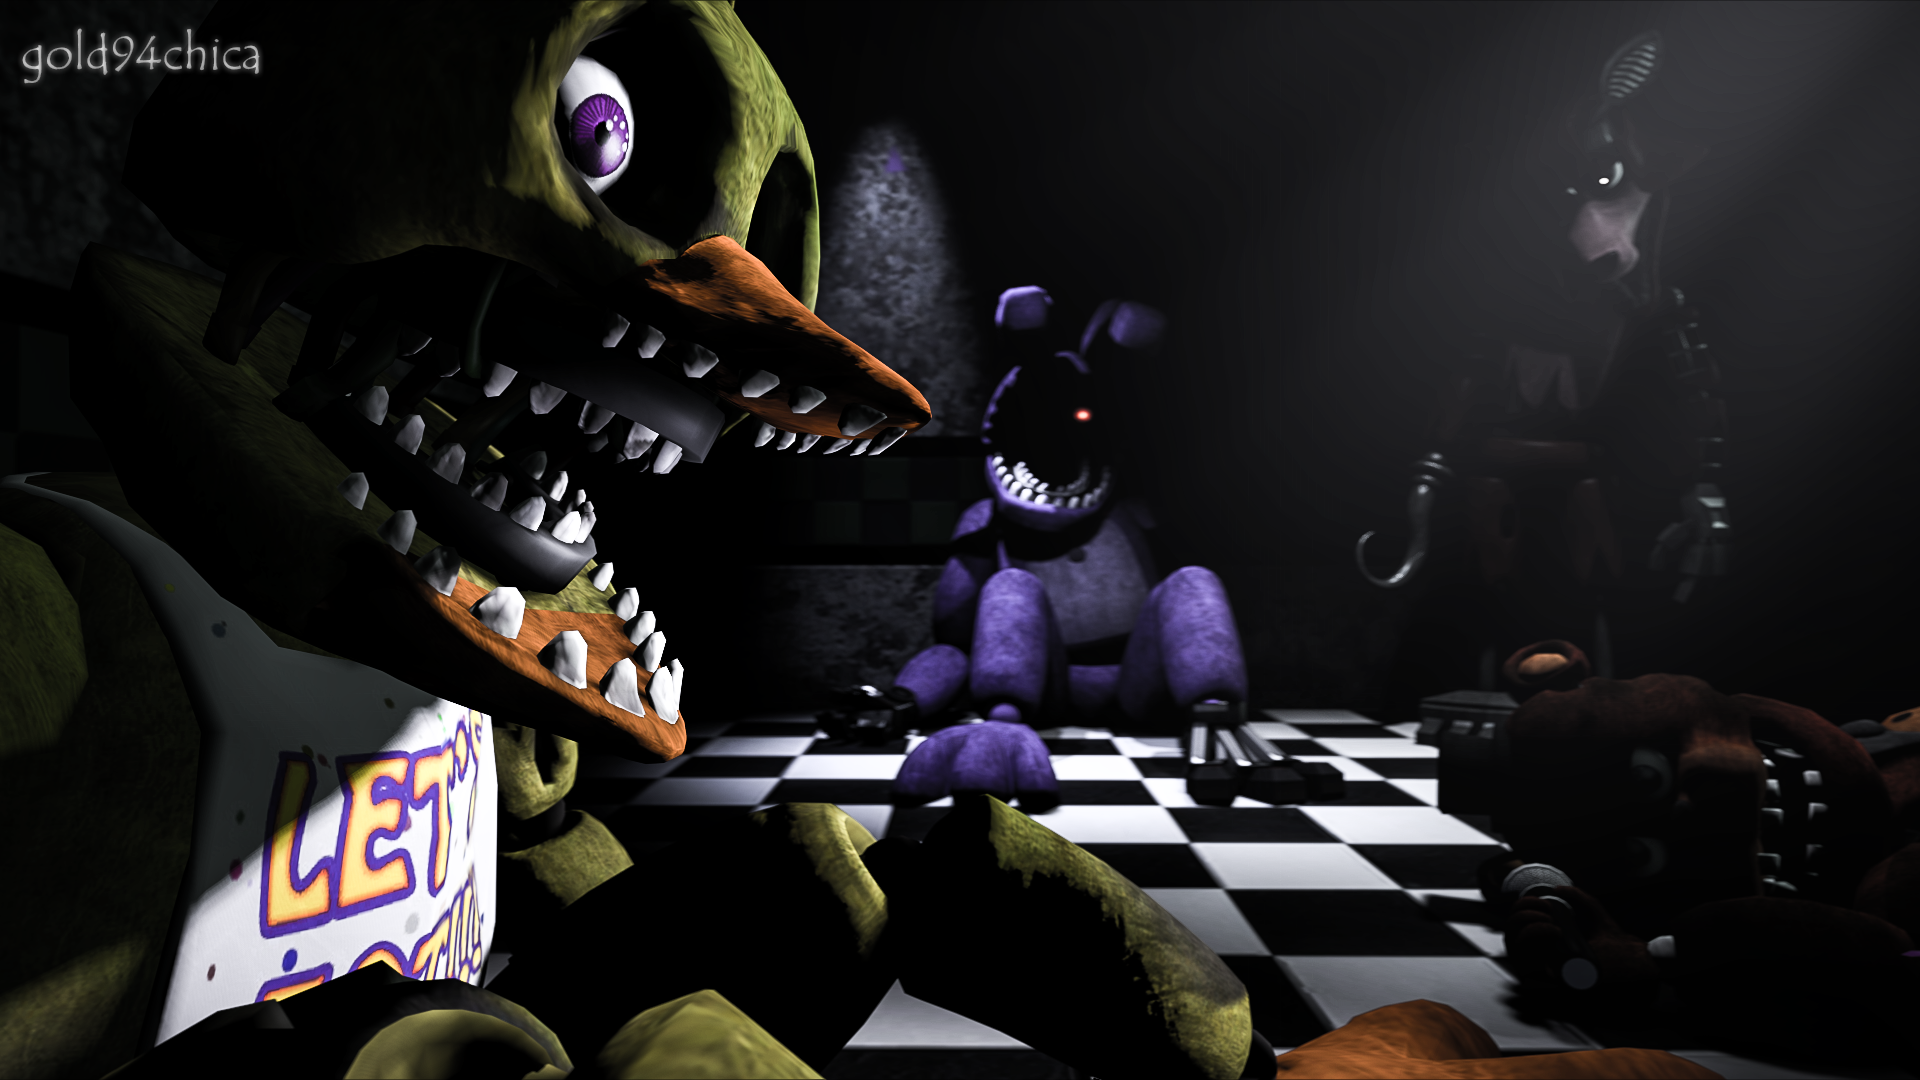 For Our Turn Sfm Fnaf2 Wallpaper By Gold94chica